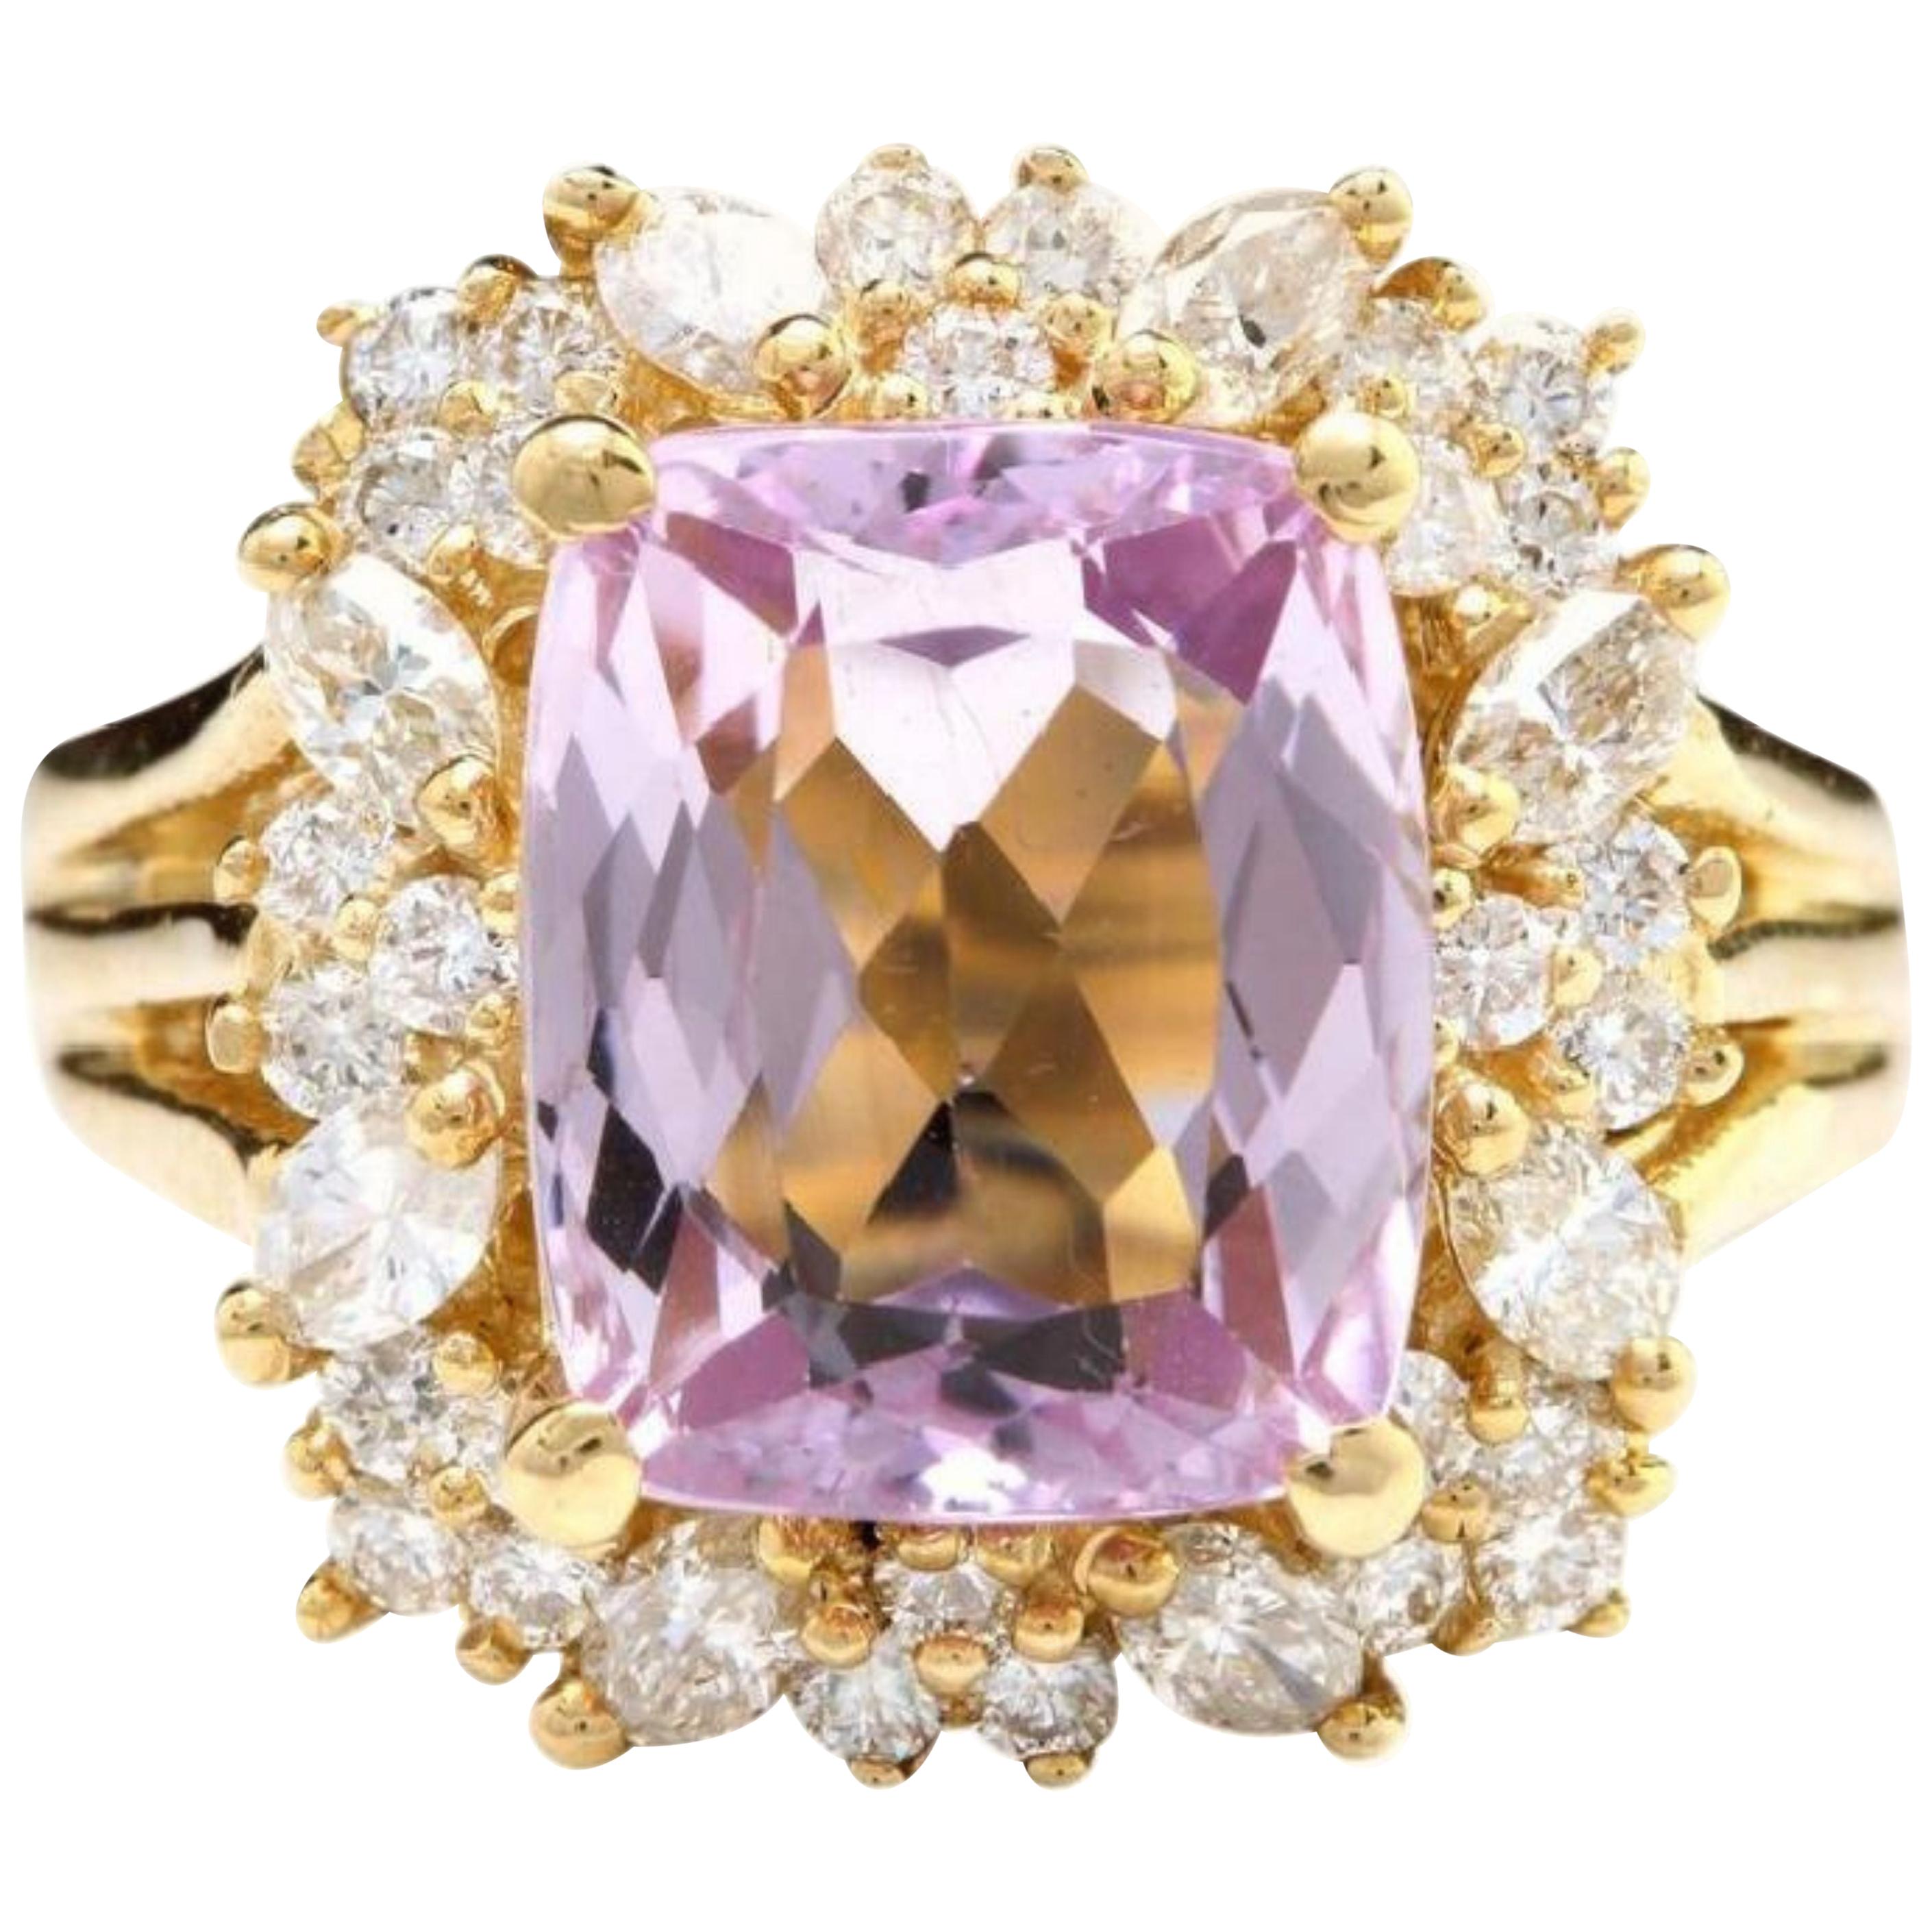 8.49 Carat Natural Kunzite and Diamond 14 Karat Solid Yellow Gold Ring For Sale